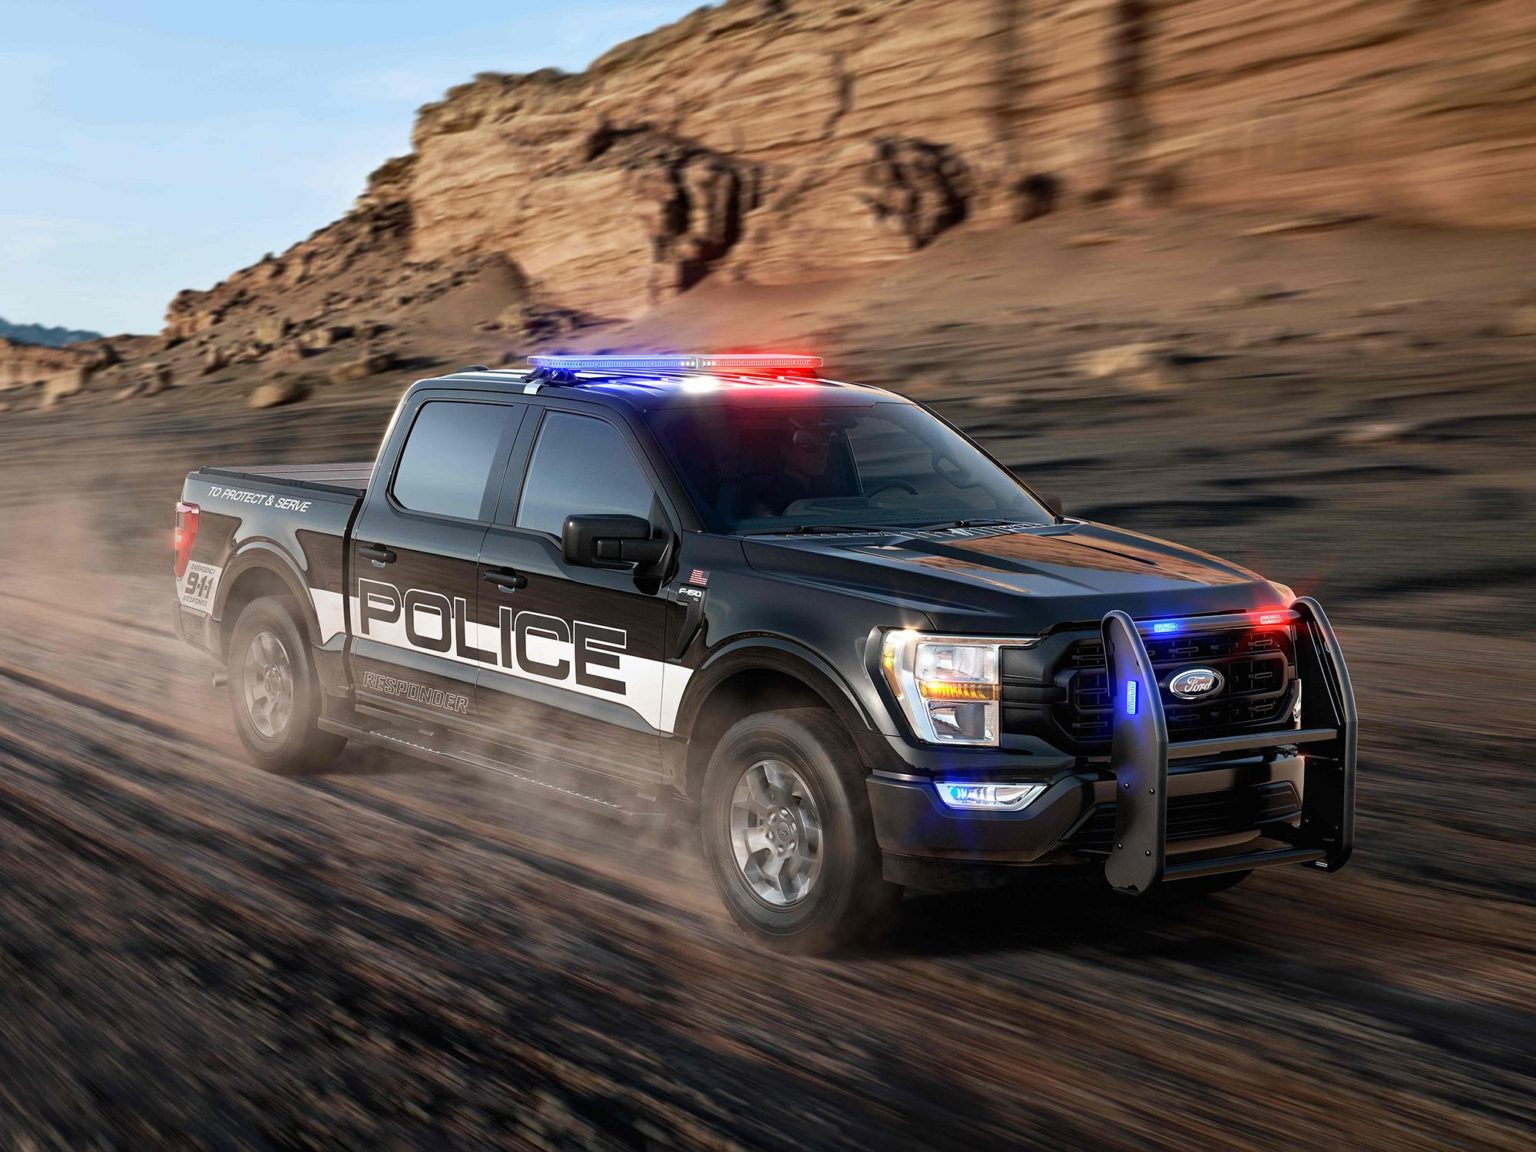 The new full-size Ford truck Forhas yielded a fresh take on the pursuit-rated version of the F-150.